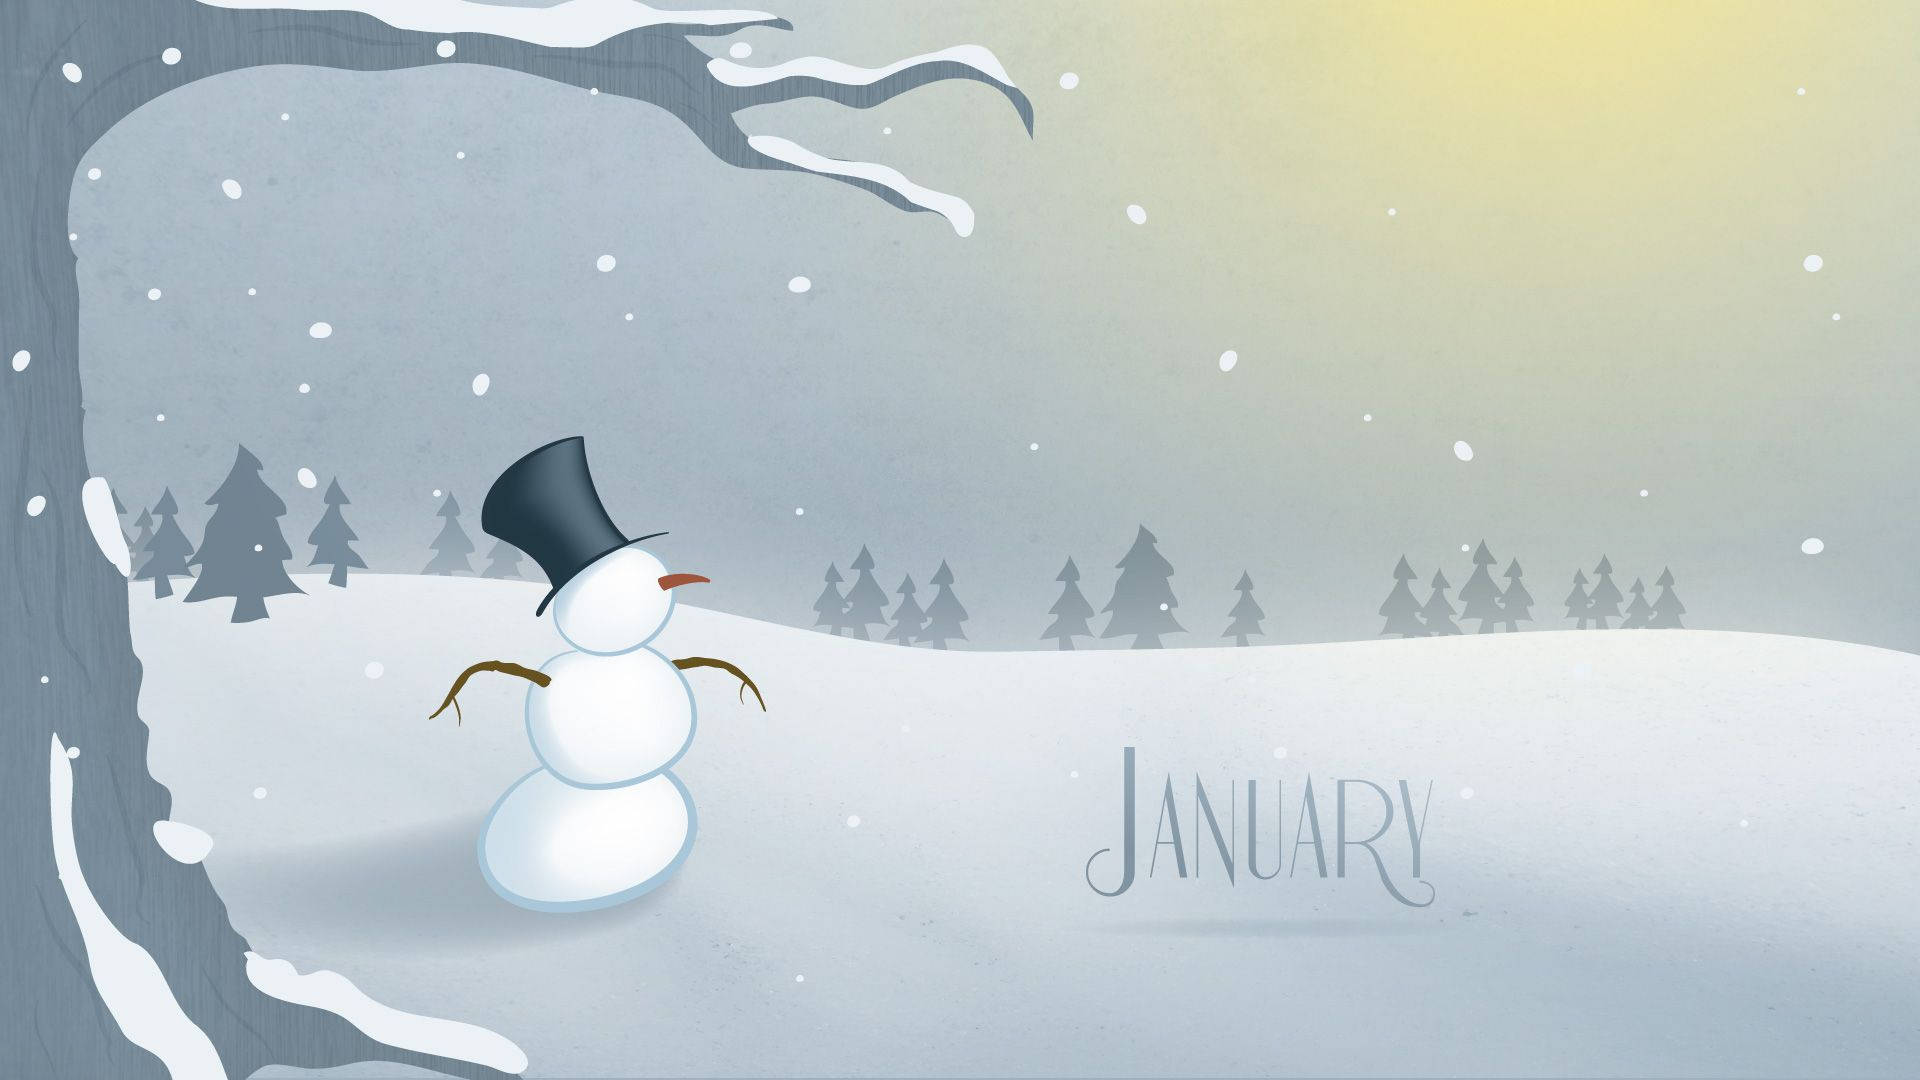 January 1920X1080 Wallpaper and Background Image